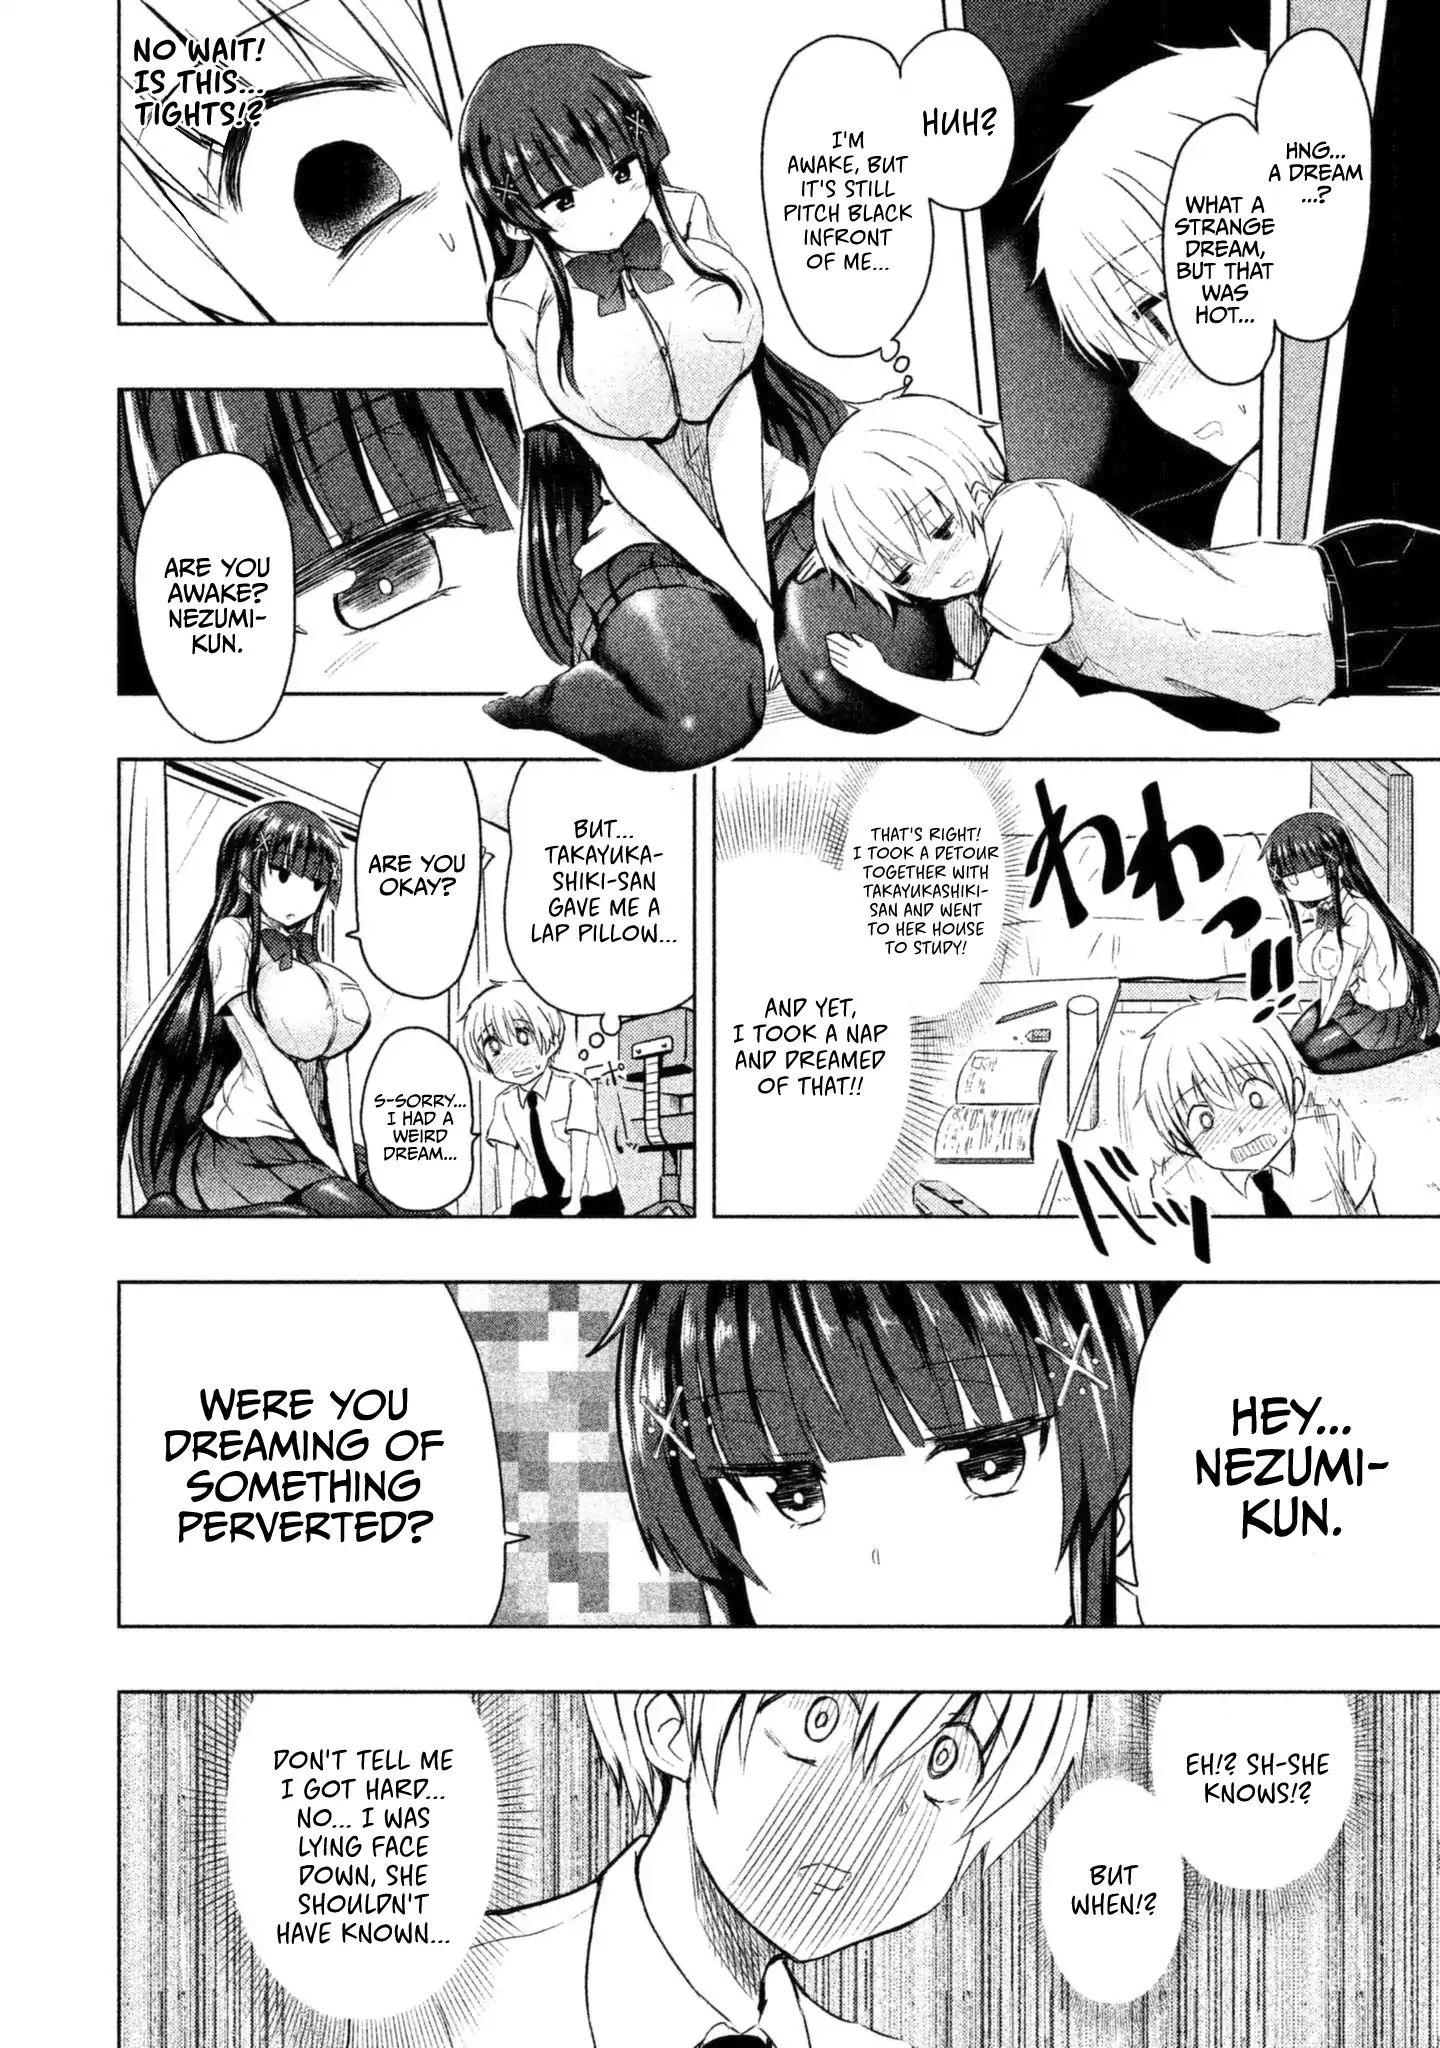 A Girl Who Is Very Well-Informed About Weird Knowledge, Takayukashiki Souko-San Chapter 12 #5